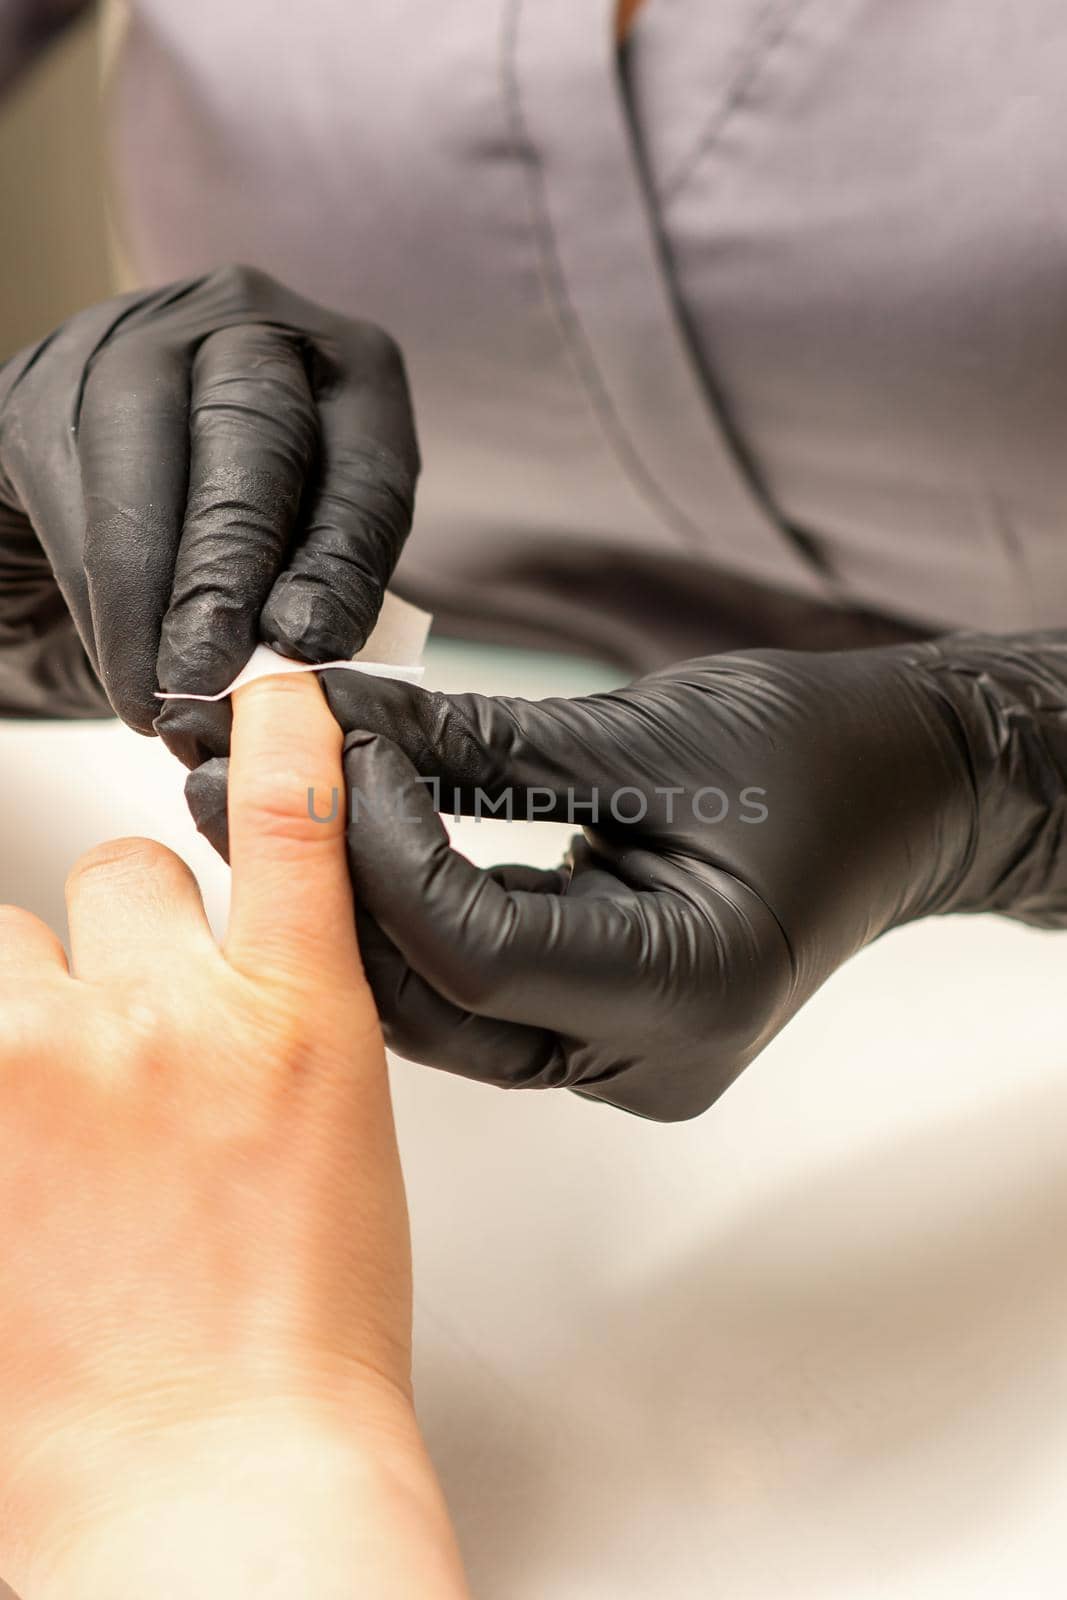 The manicurist finishes the procedure for red nail polishing and cleaning with a cotton napkin, pad, swab in a beauty salon, close up. by okskukuruza